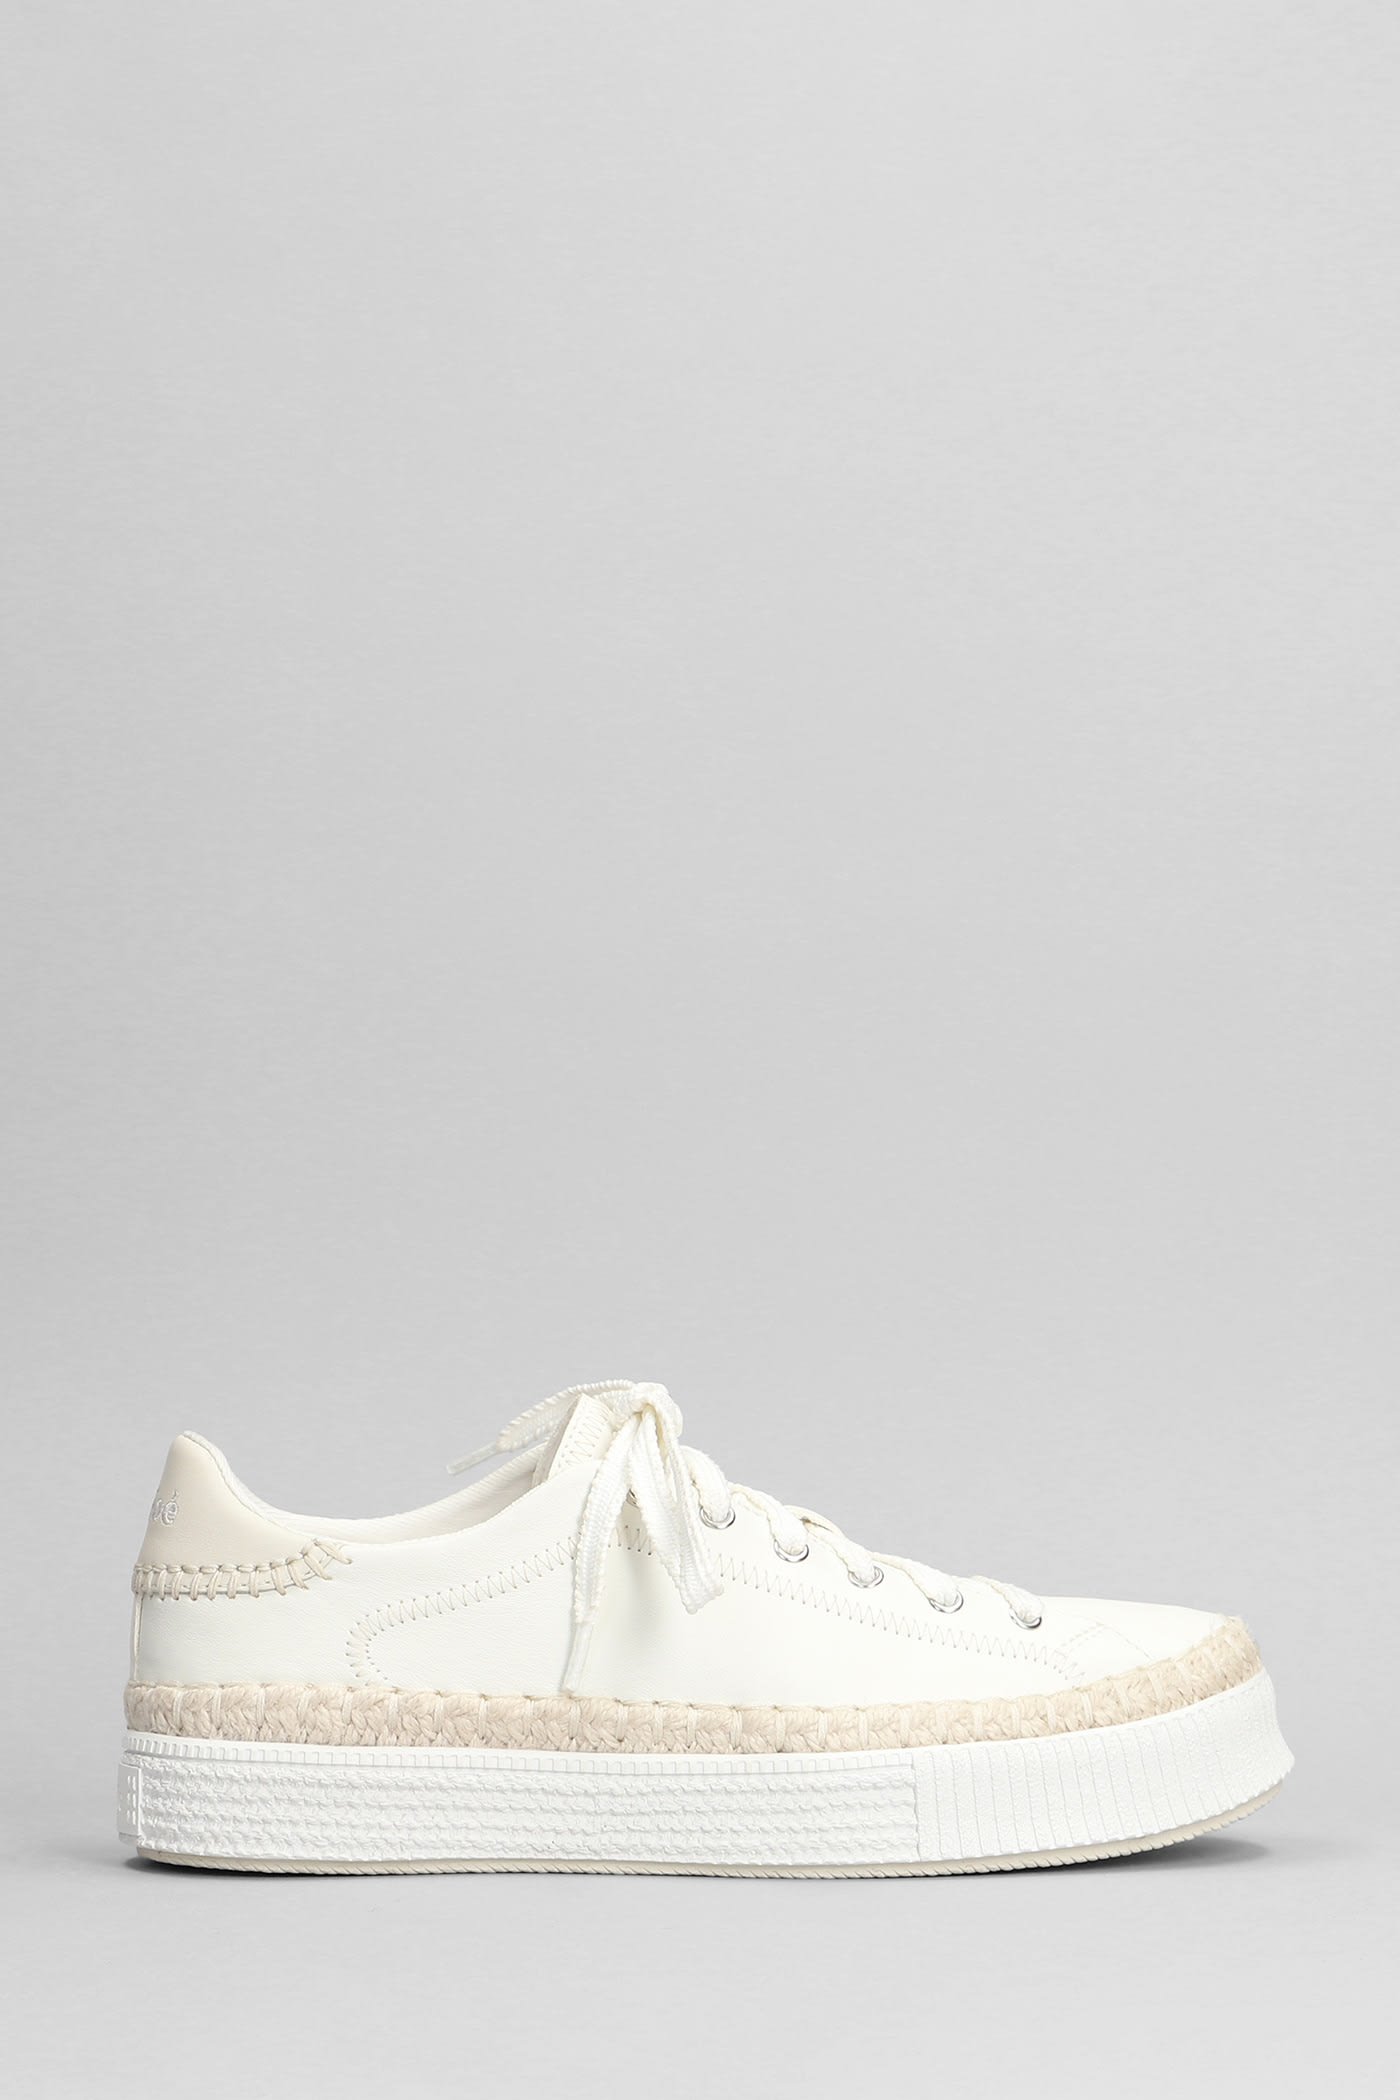 Chloé Telma Sneakers In White Leather